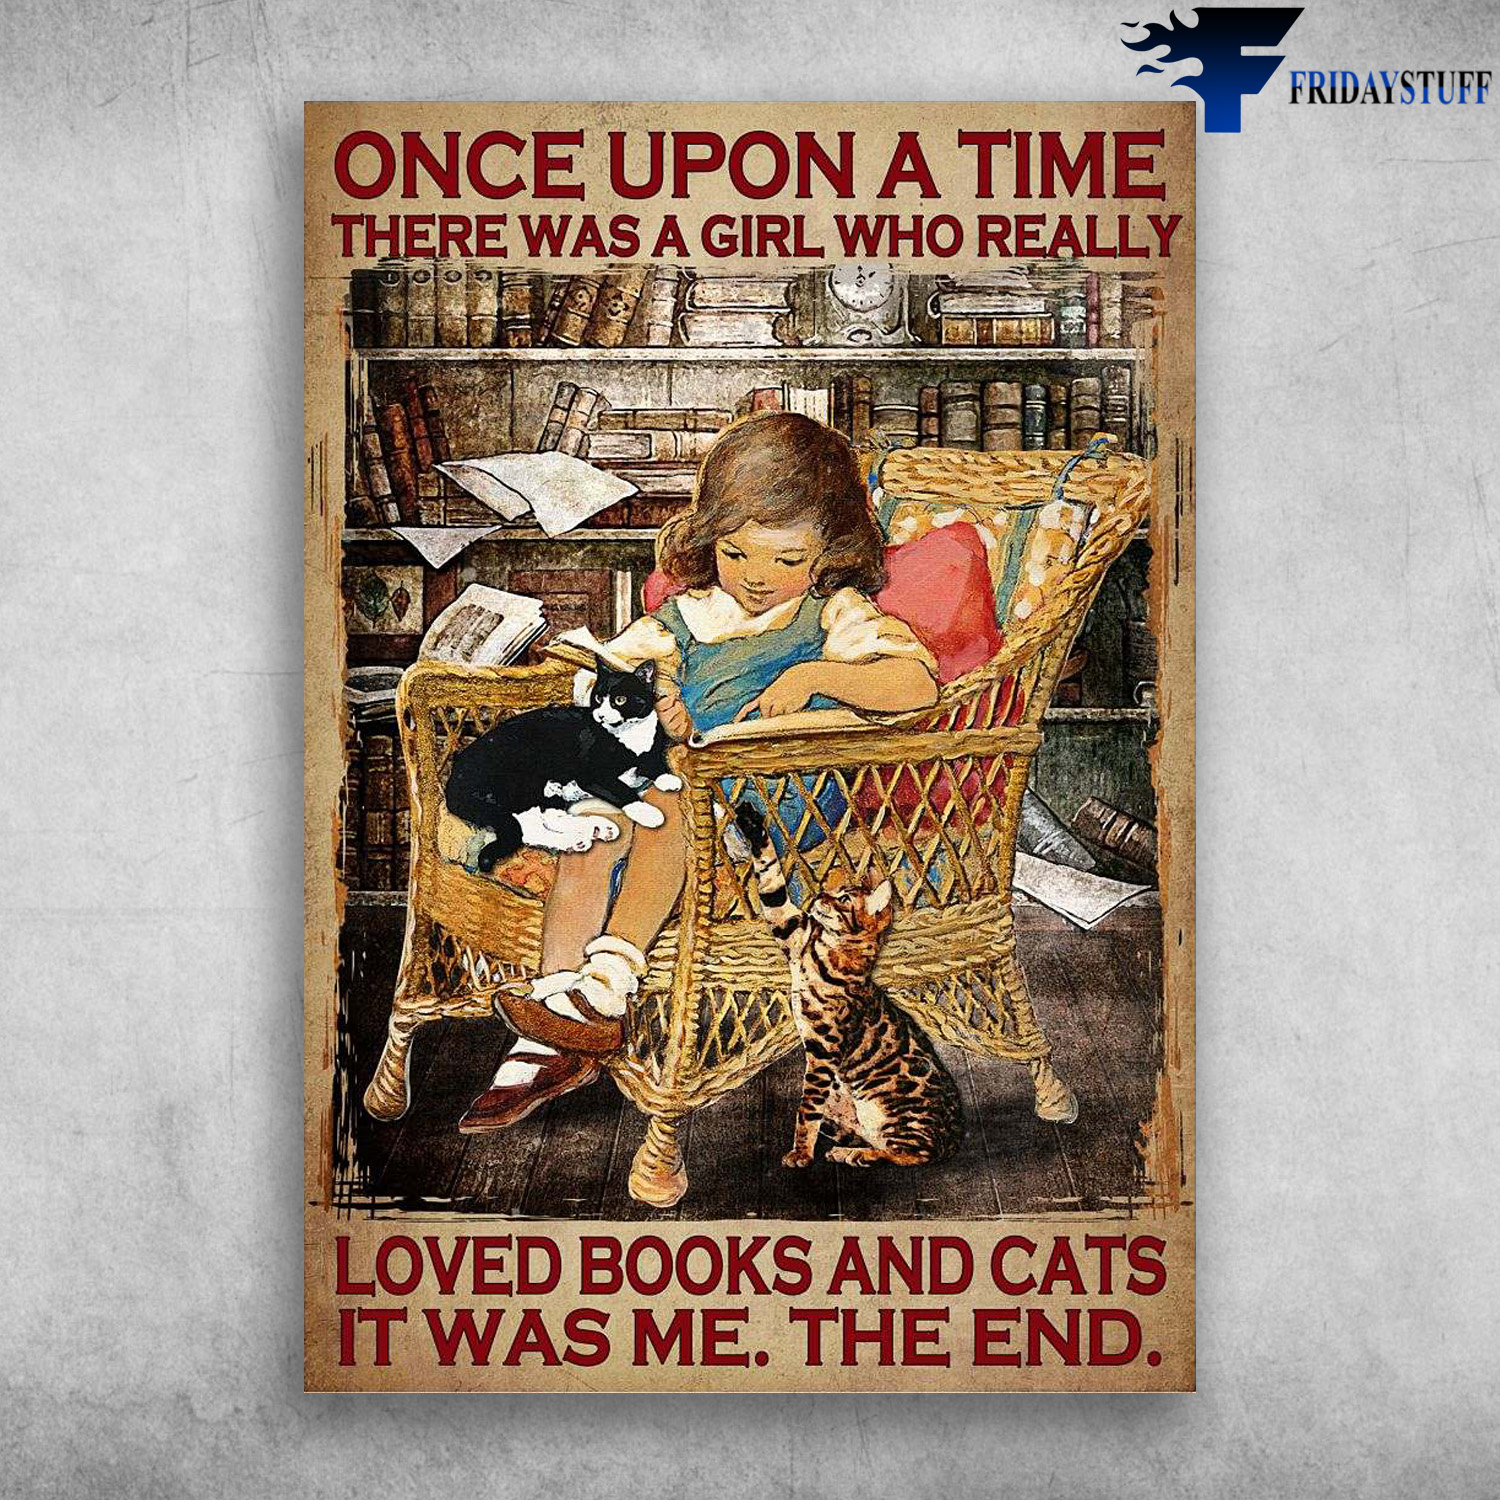 Little Girl, Book And Cat - Once Upon A Time, There Was A Girl, Who Really Loved Books And Cats, It Was Me, The End